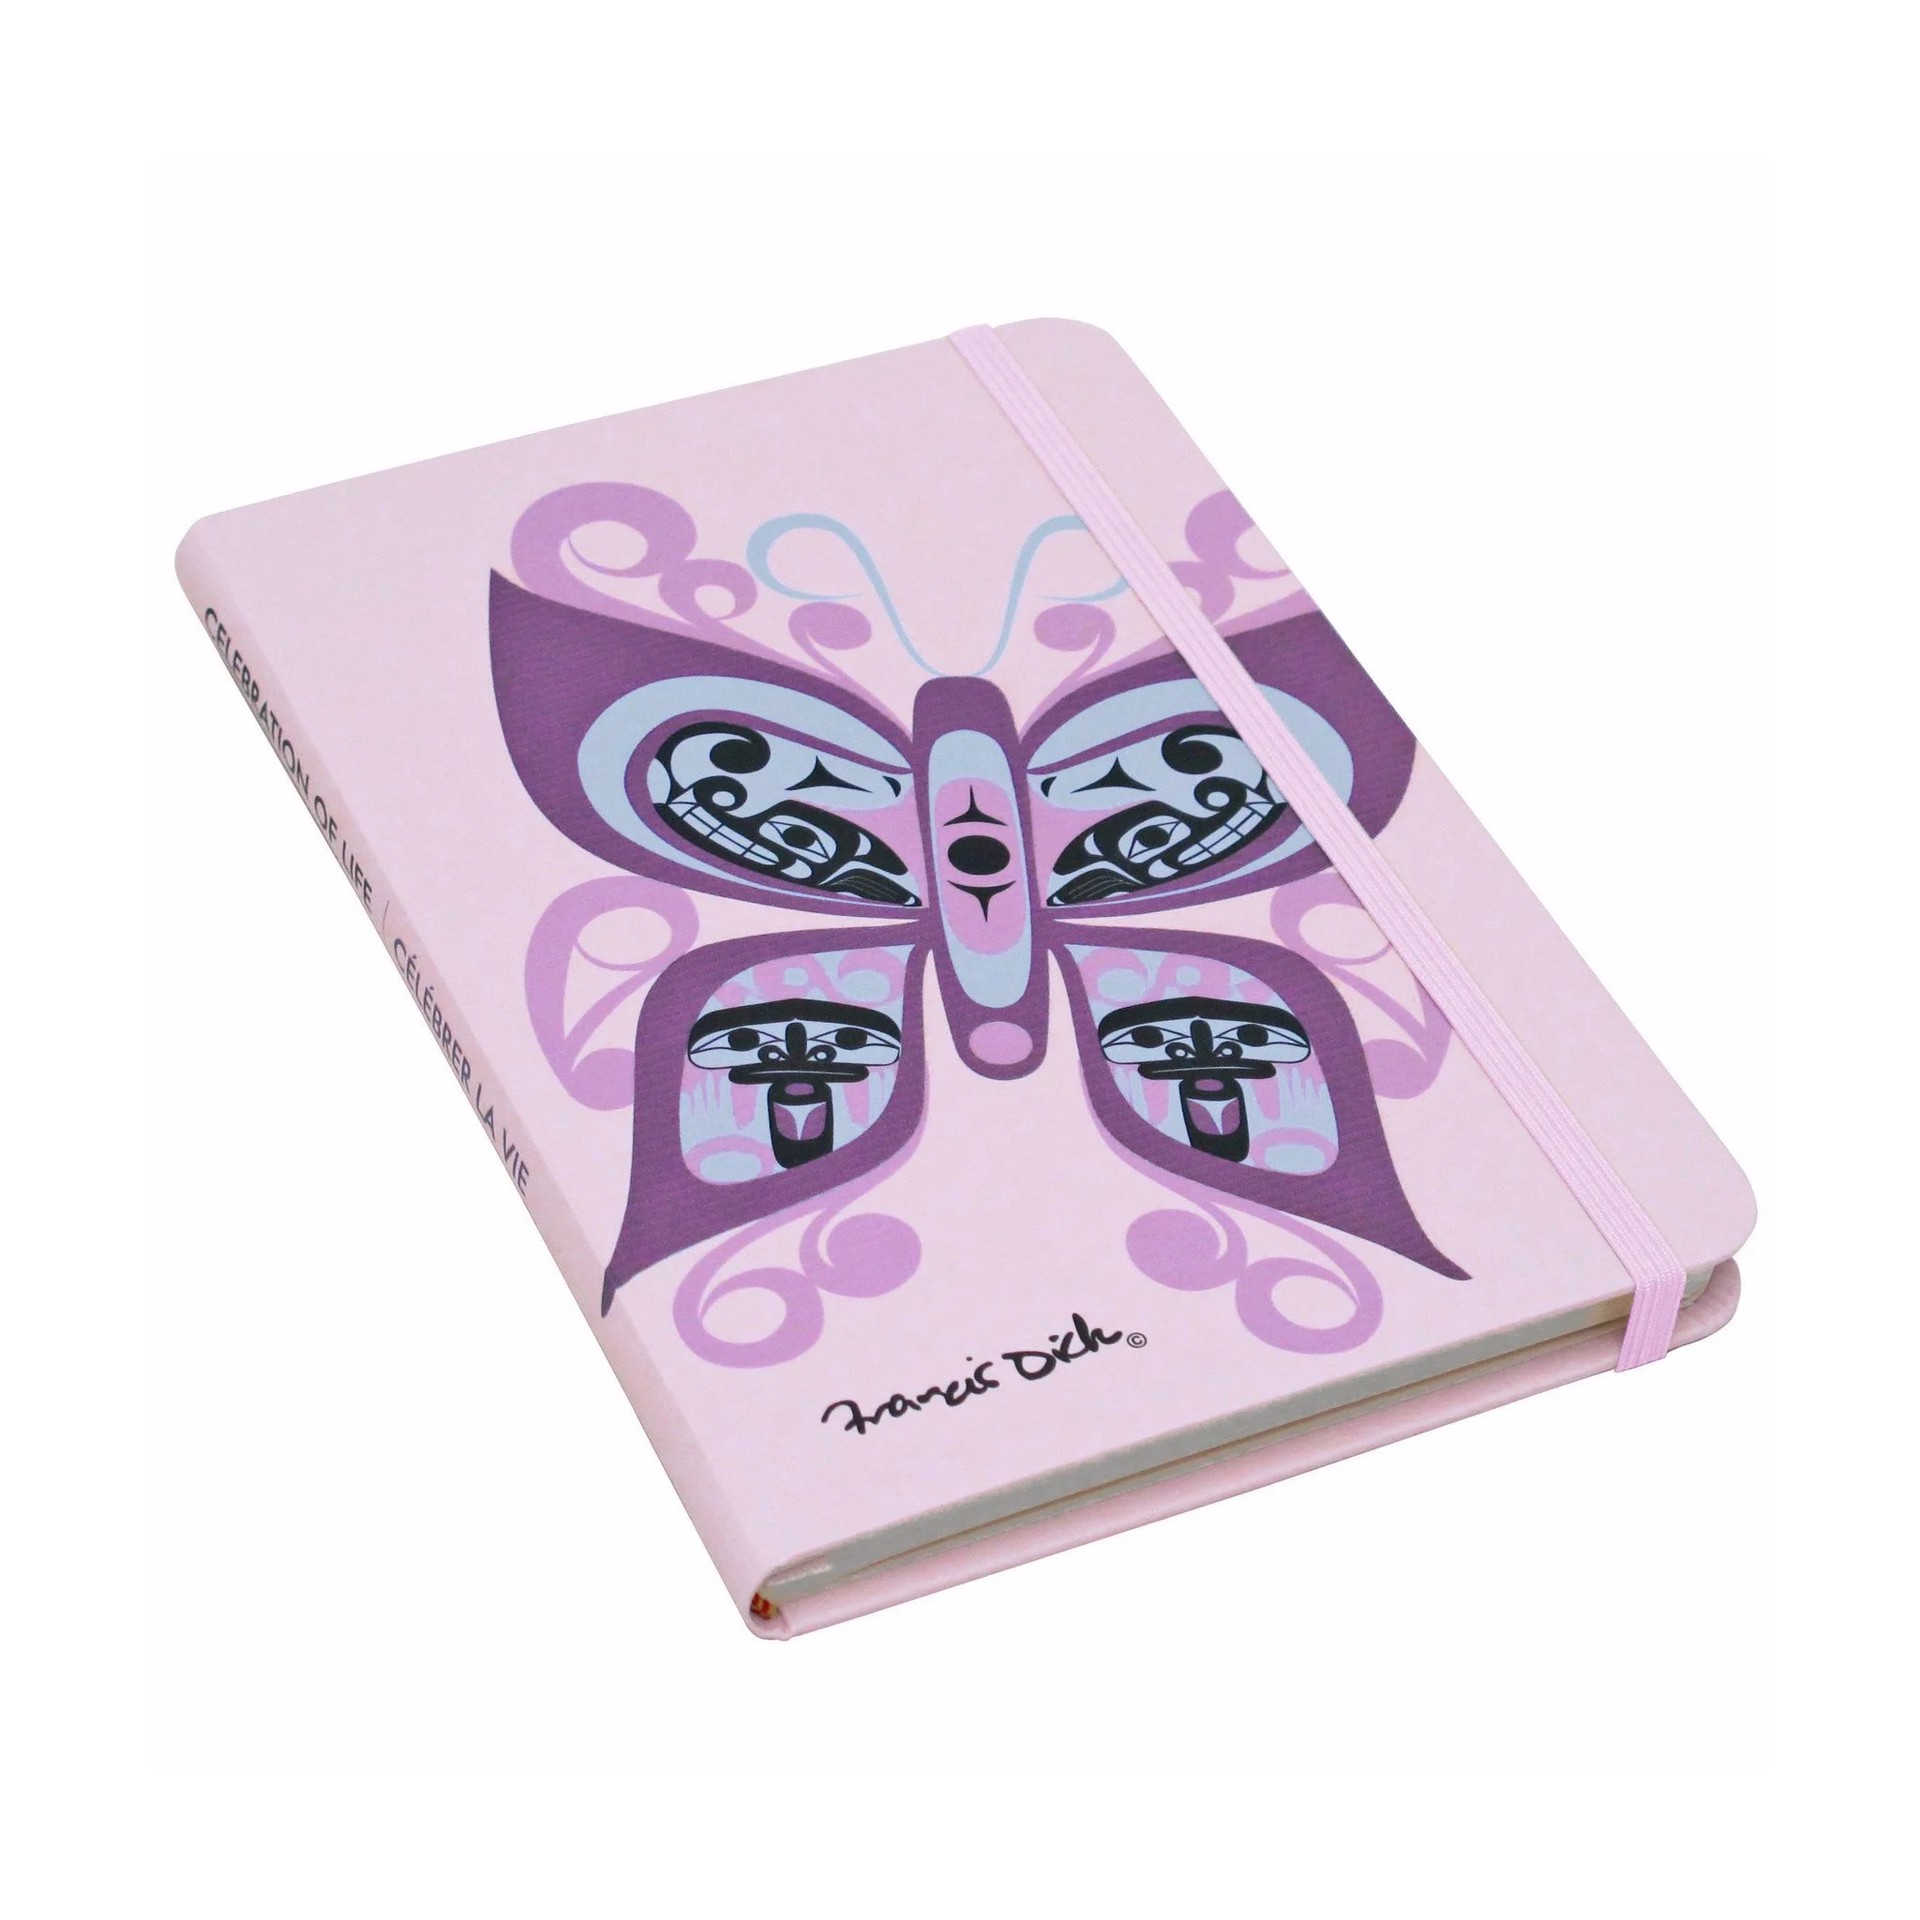 Celebration of Life Hardcover Journal by Francis Dick